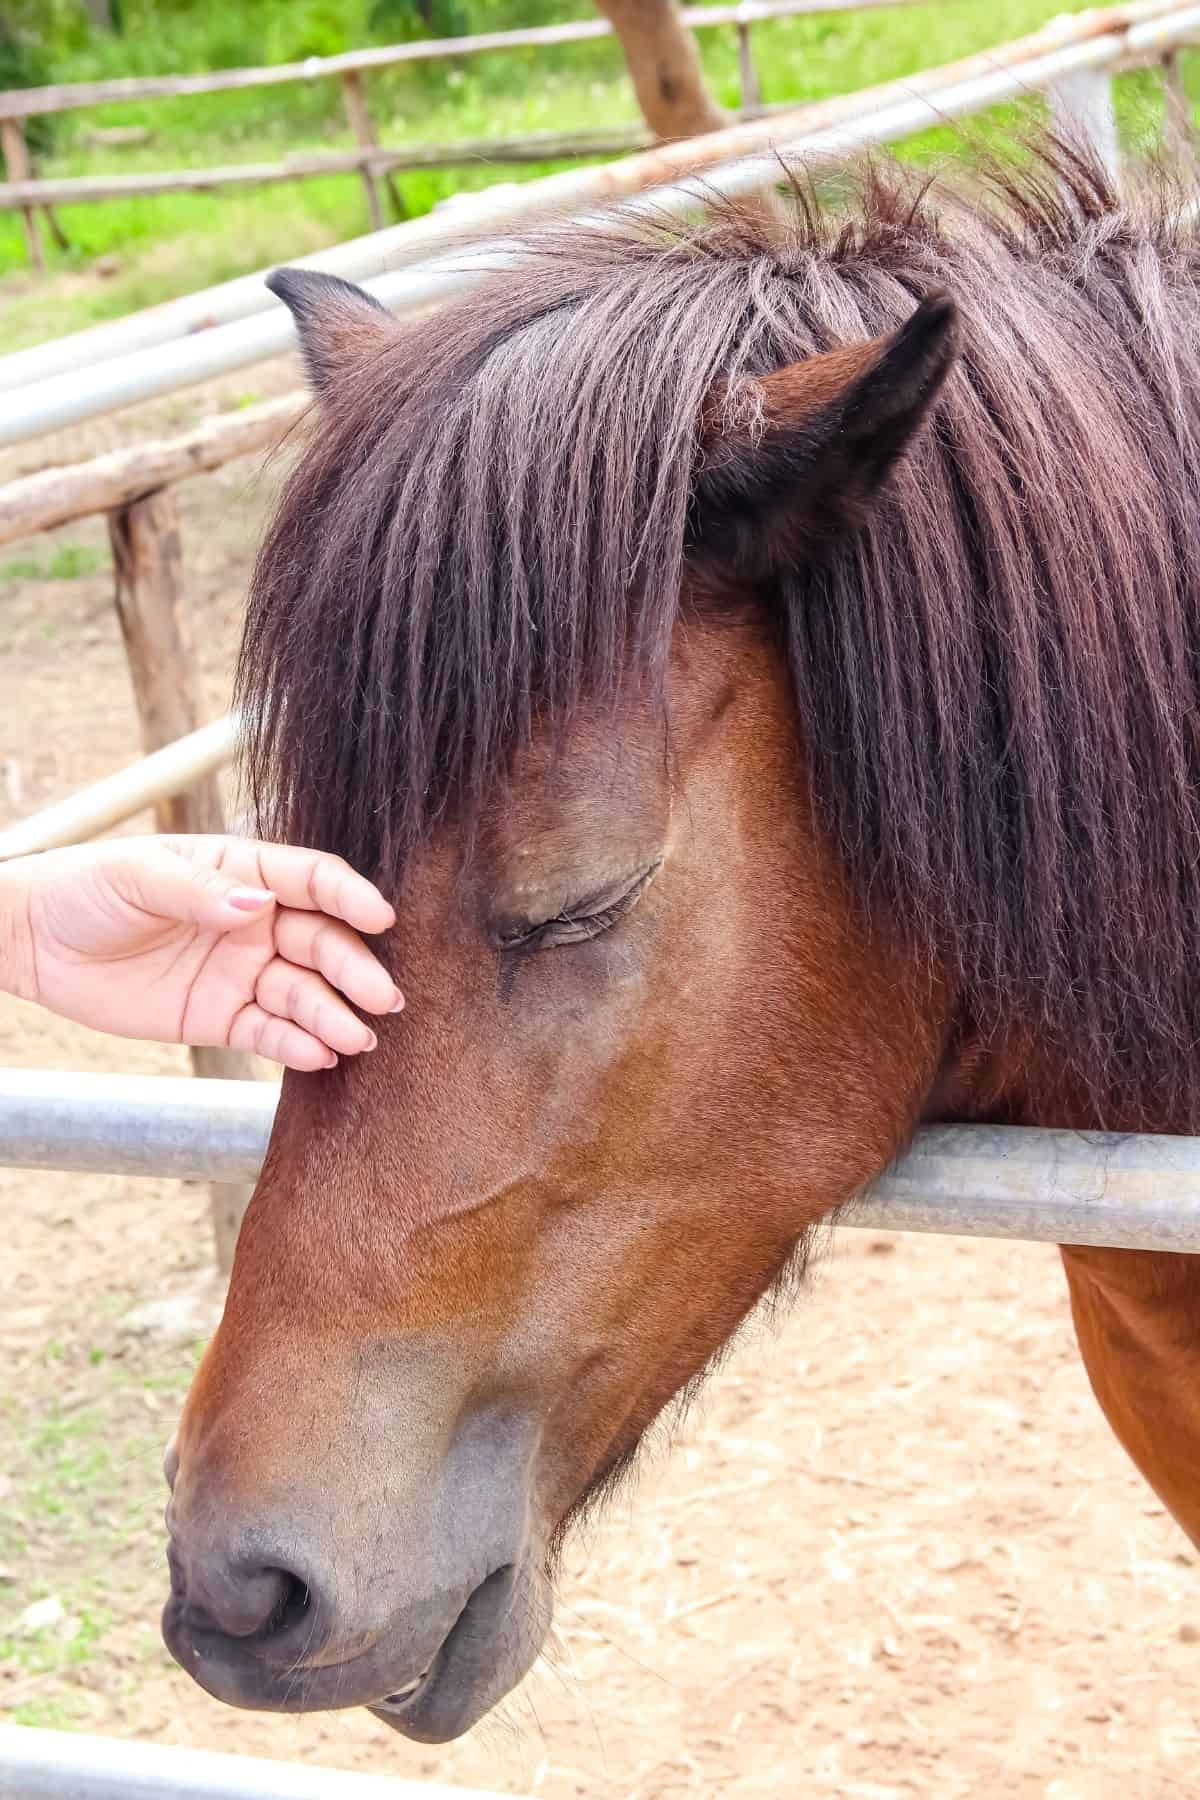 Petting horse nose